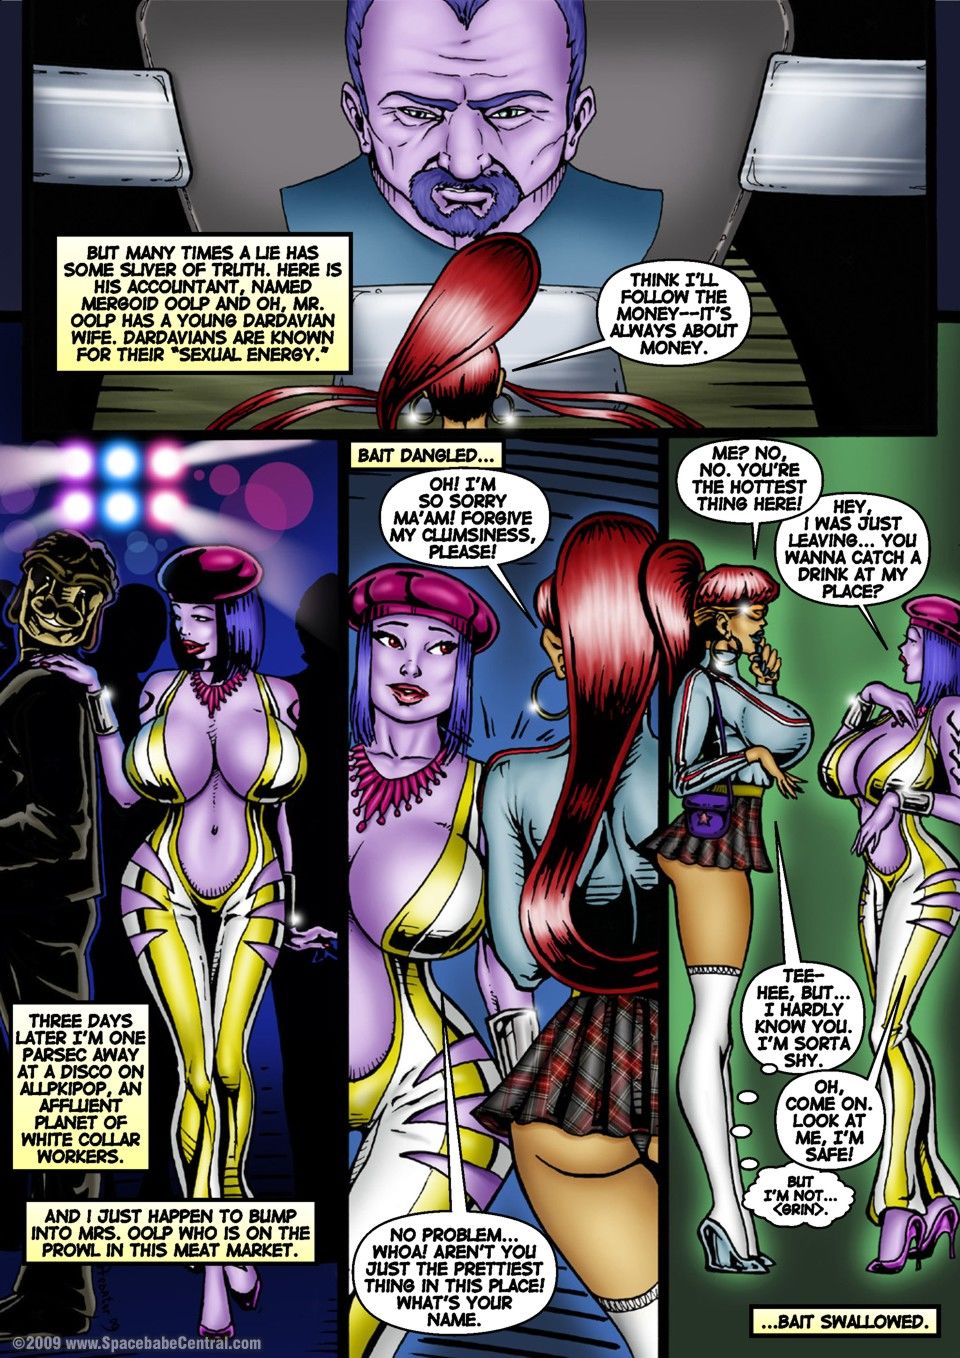 Alien Huntress 16-20 - Spacebabe Central page 17